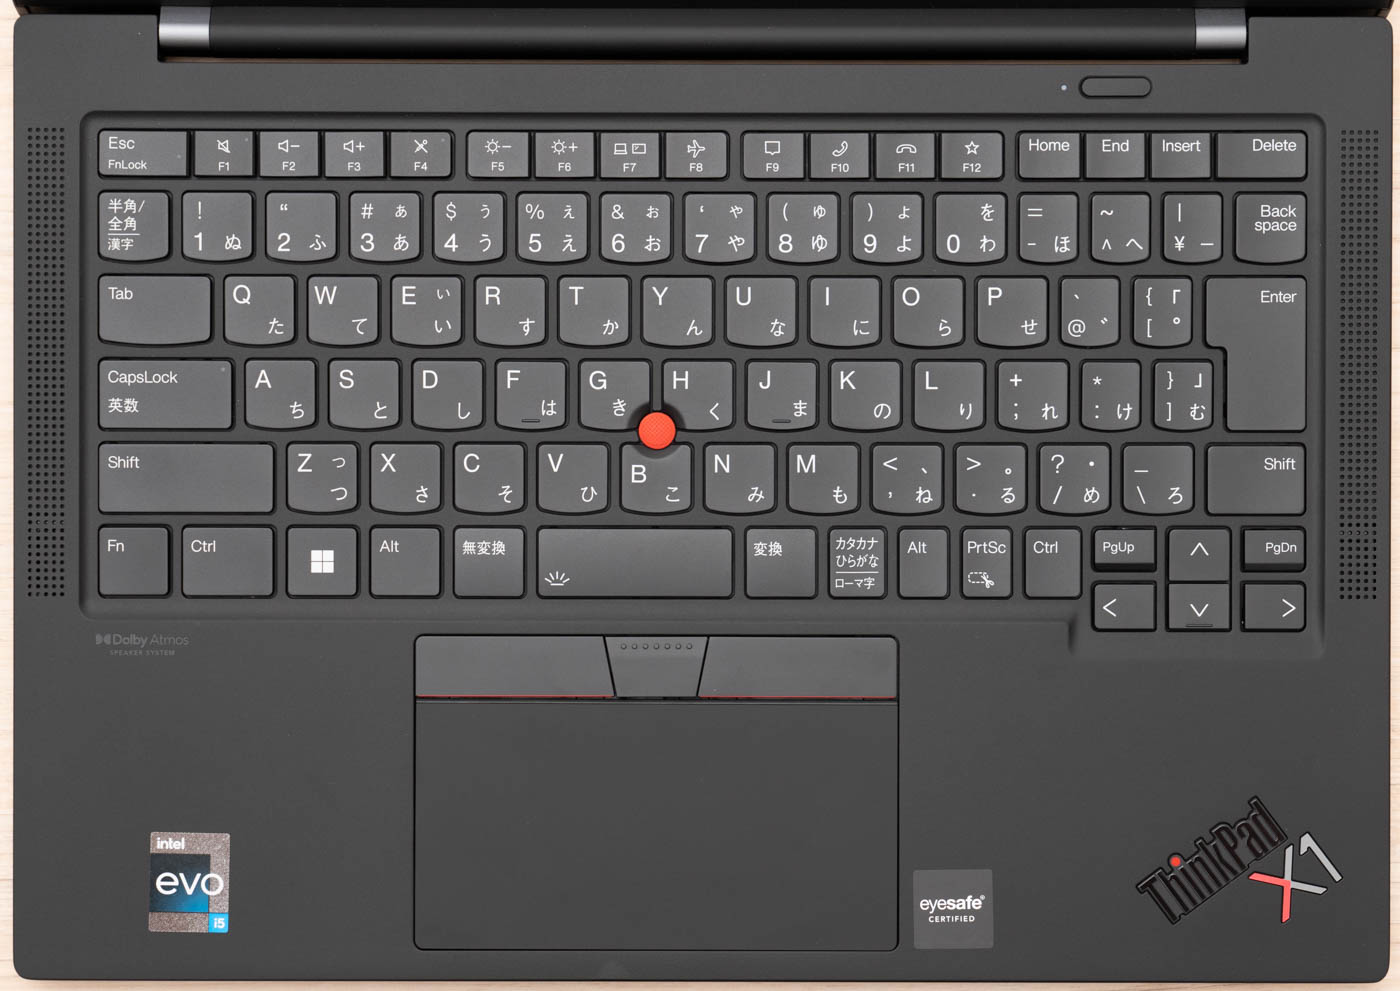 ThinkPad X1 Carbon Gen 10 (2022) の実機レビュー - the比較